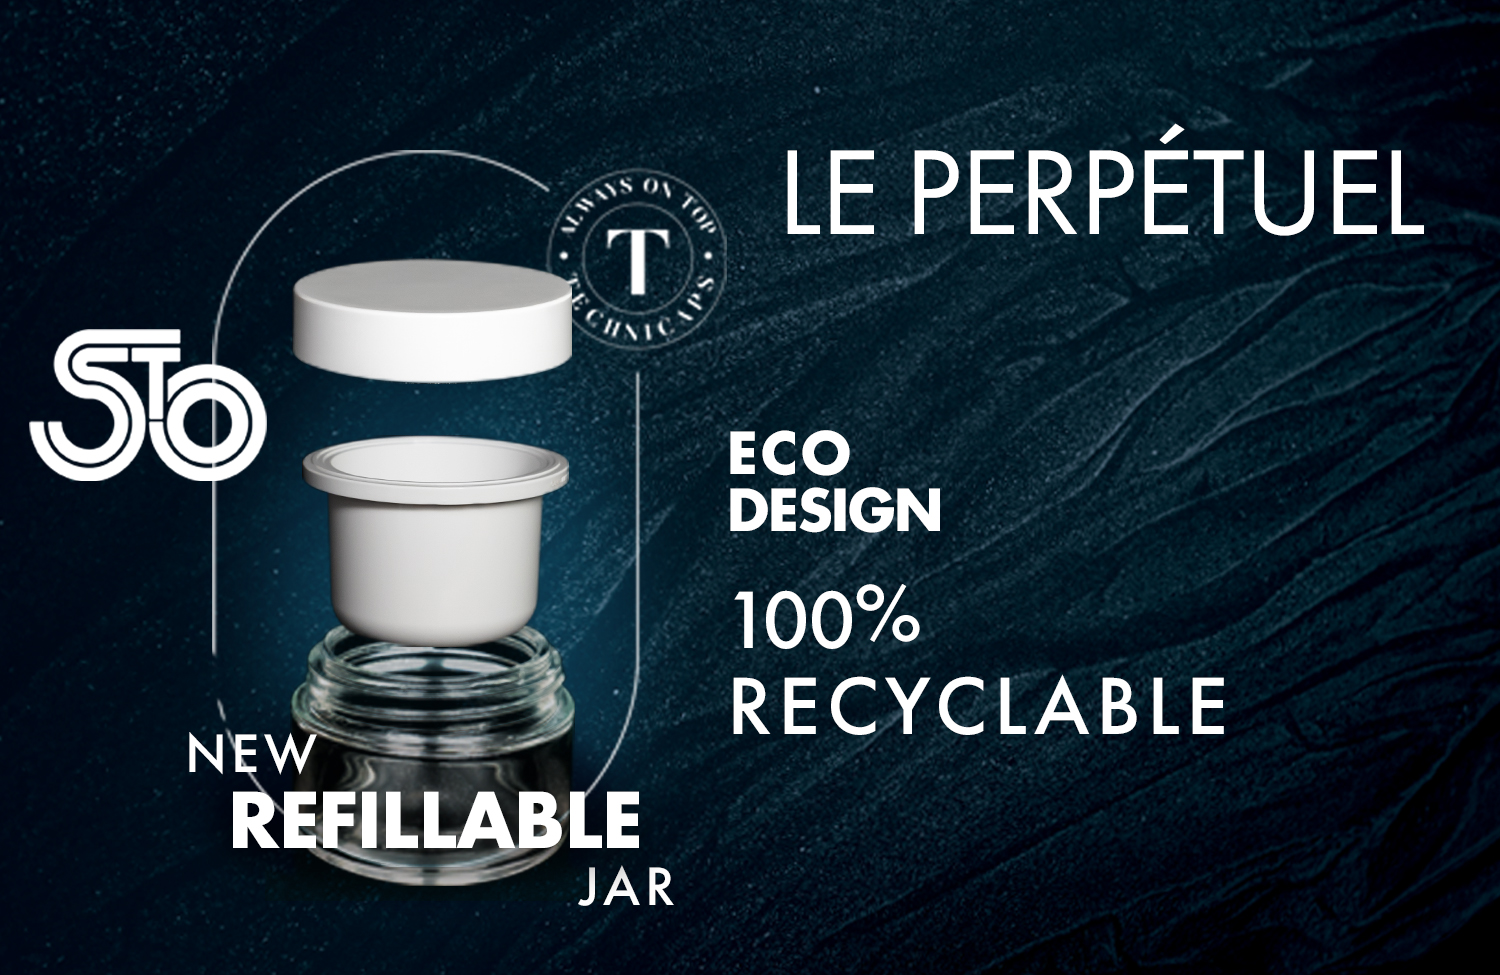 Plastic-free loss refills to fit in glass container